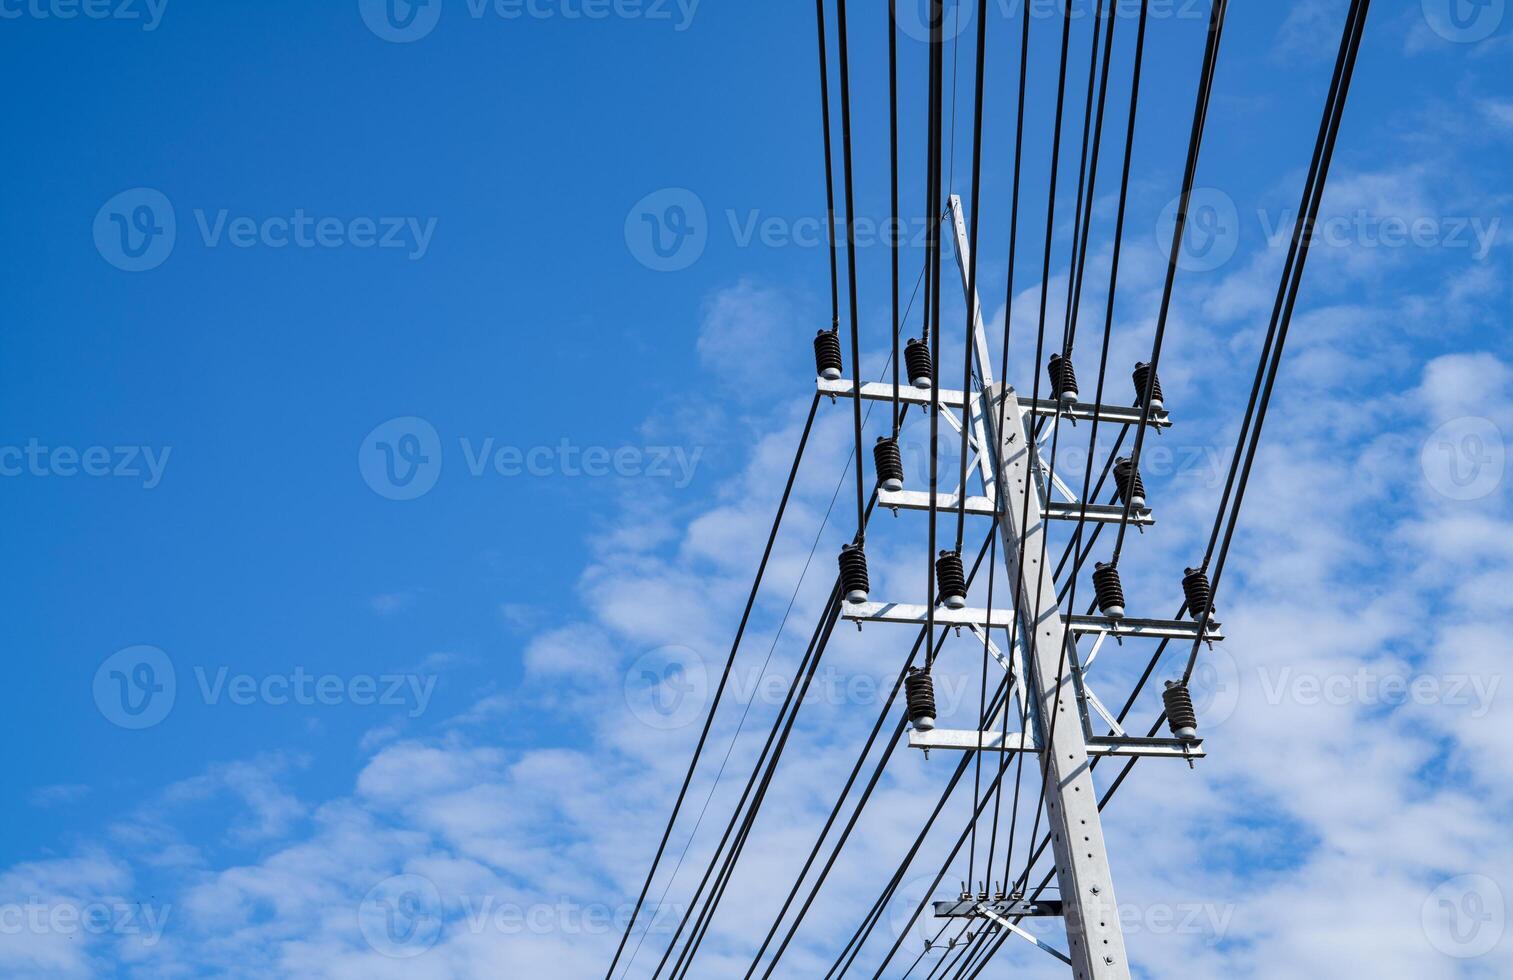 Electricity transmission pylon. Transmission tower collect electricity from wind turbines for sustainable energy. Clean power. Renewable energy infrastructure. Electricity high-voltage lines. photo